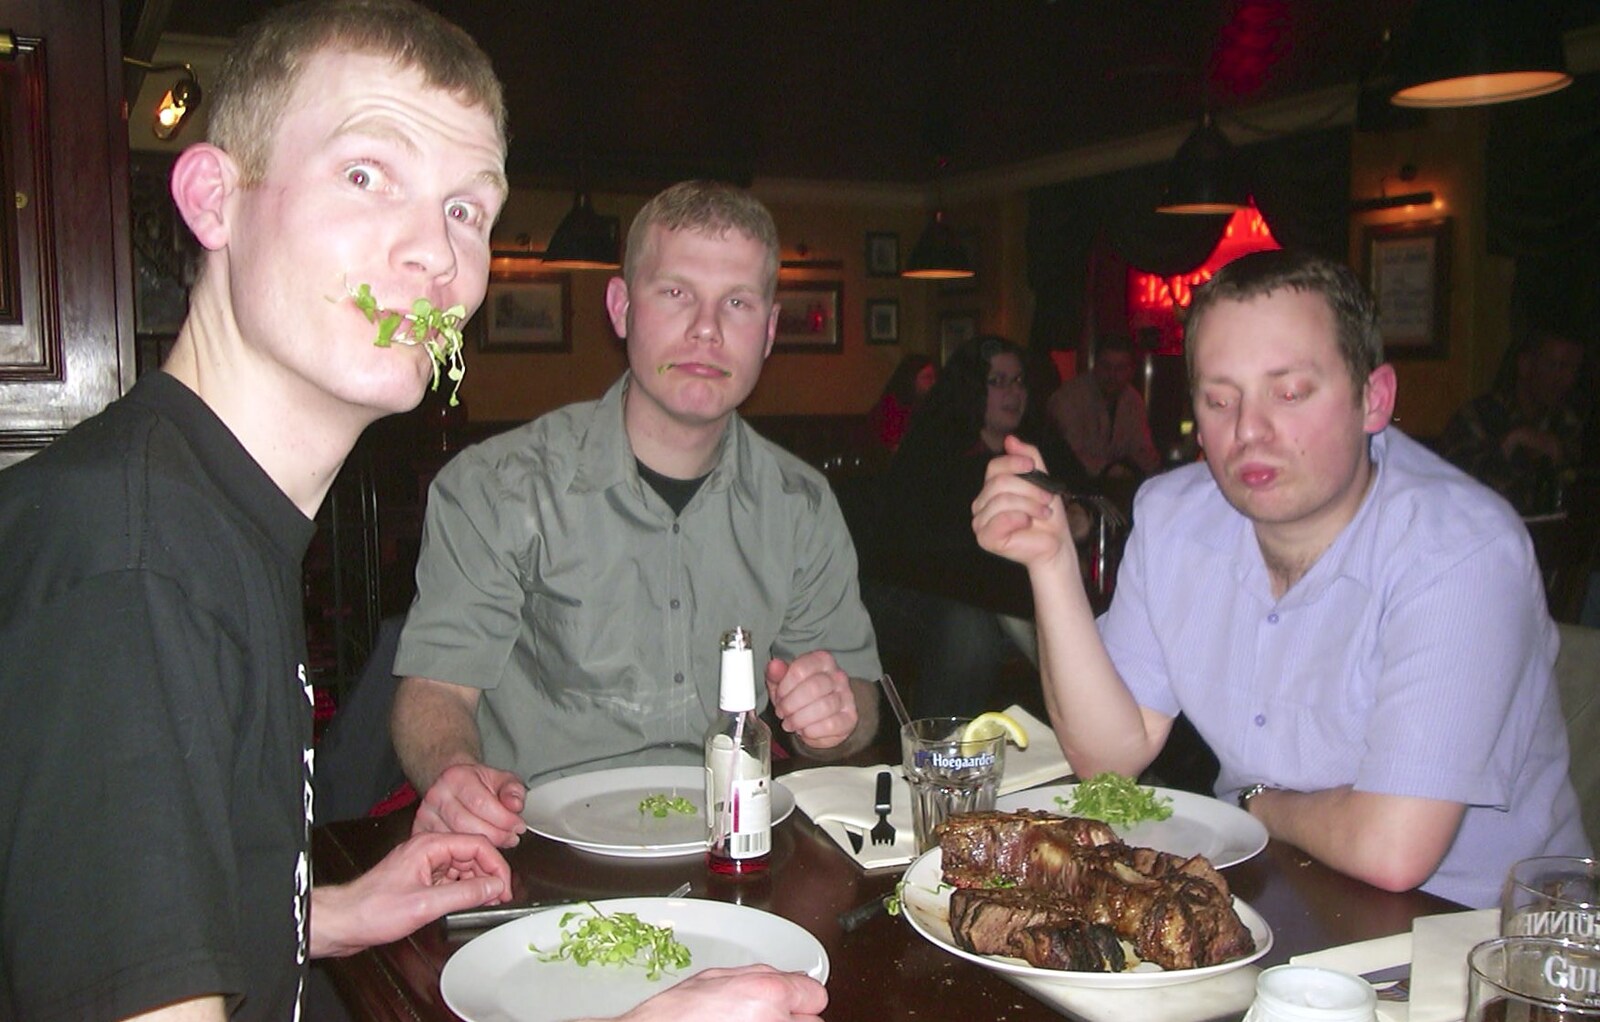 Andy eats some greens in a steak restaurant from Anne Frank, Markets and Mikey-P's Stag Do, Amsterdam, Netherlands - 6th March 2004